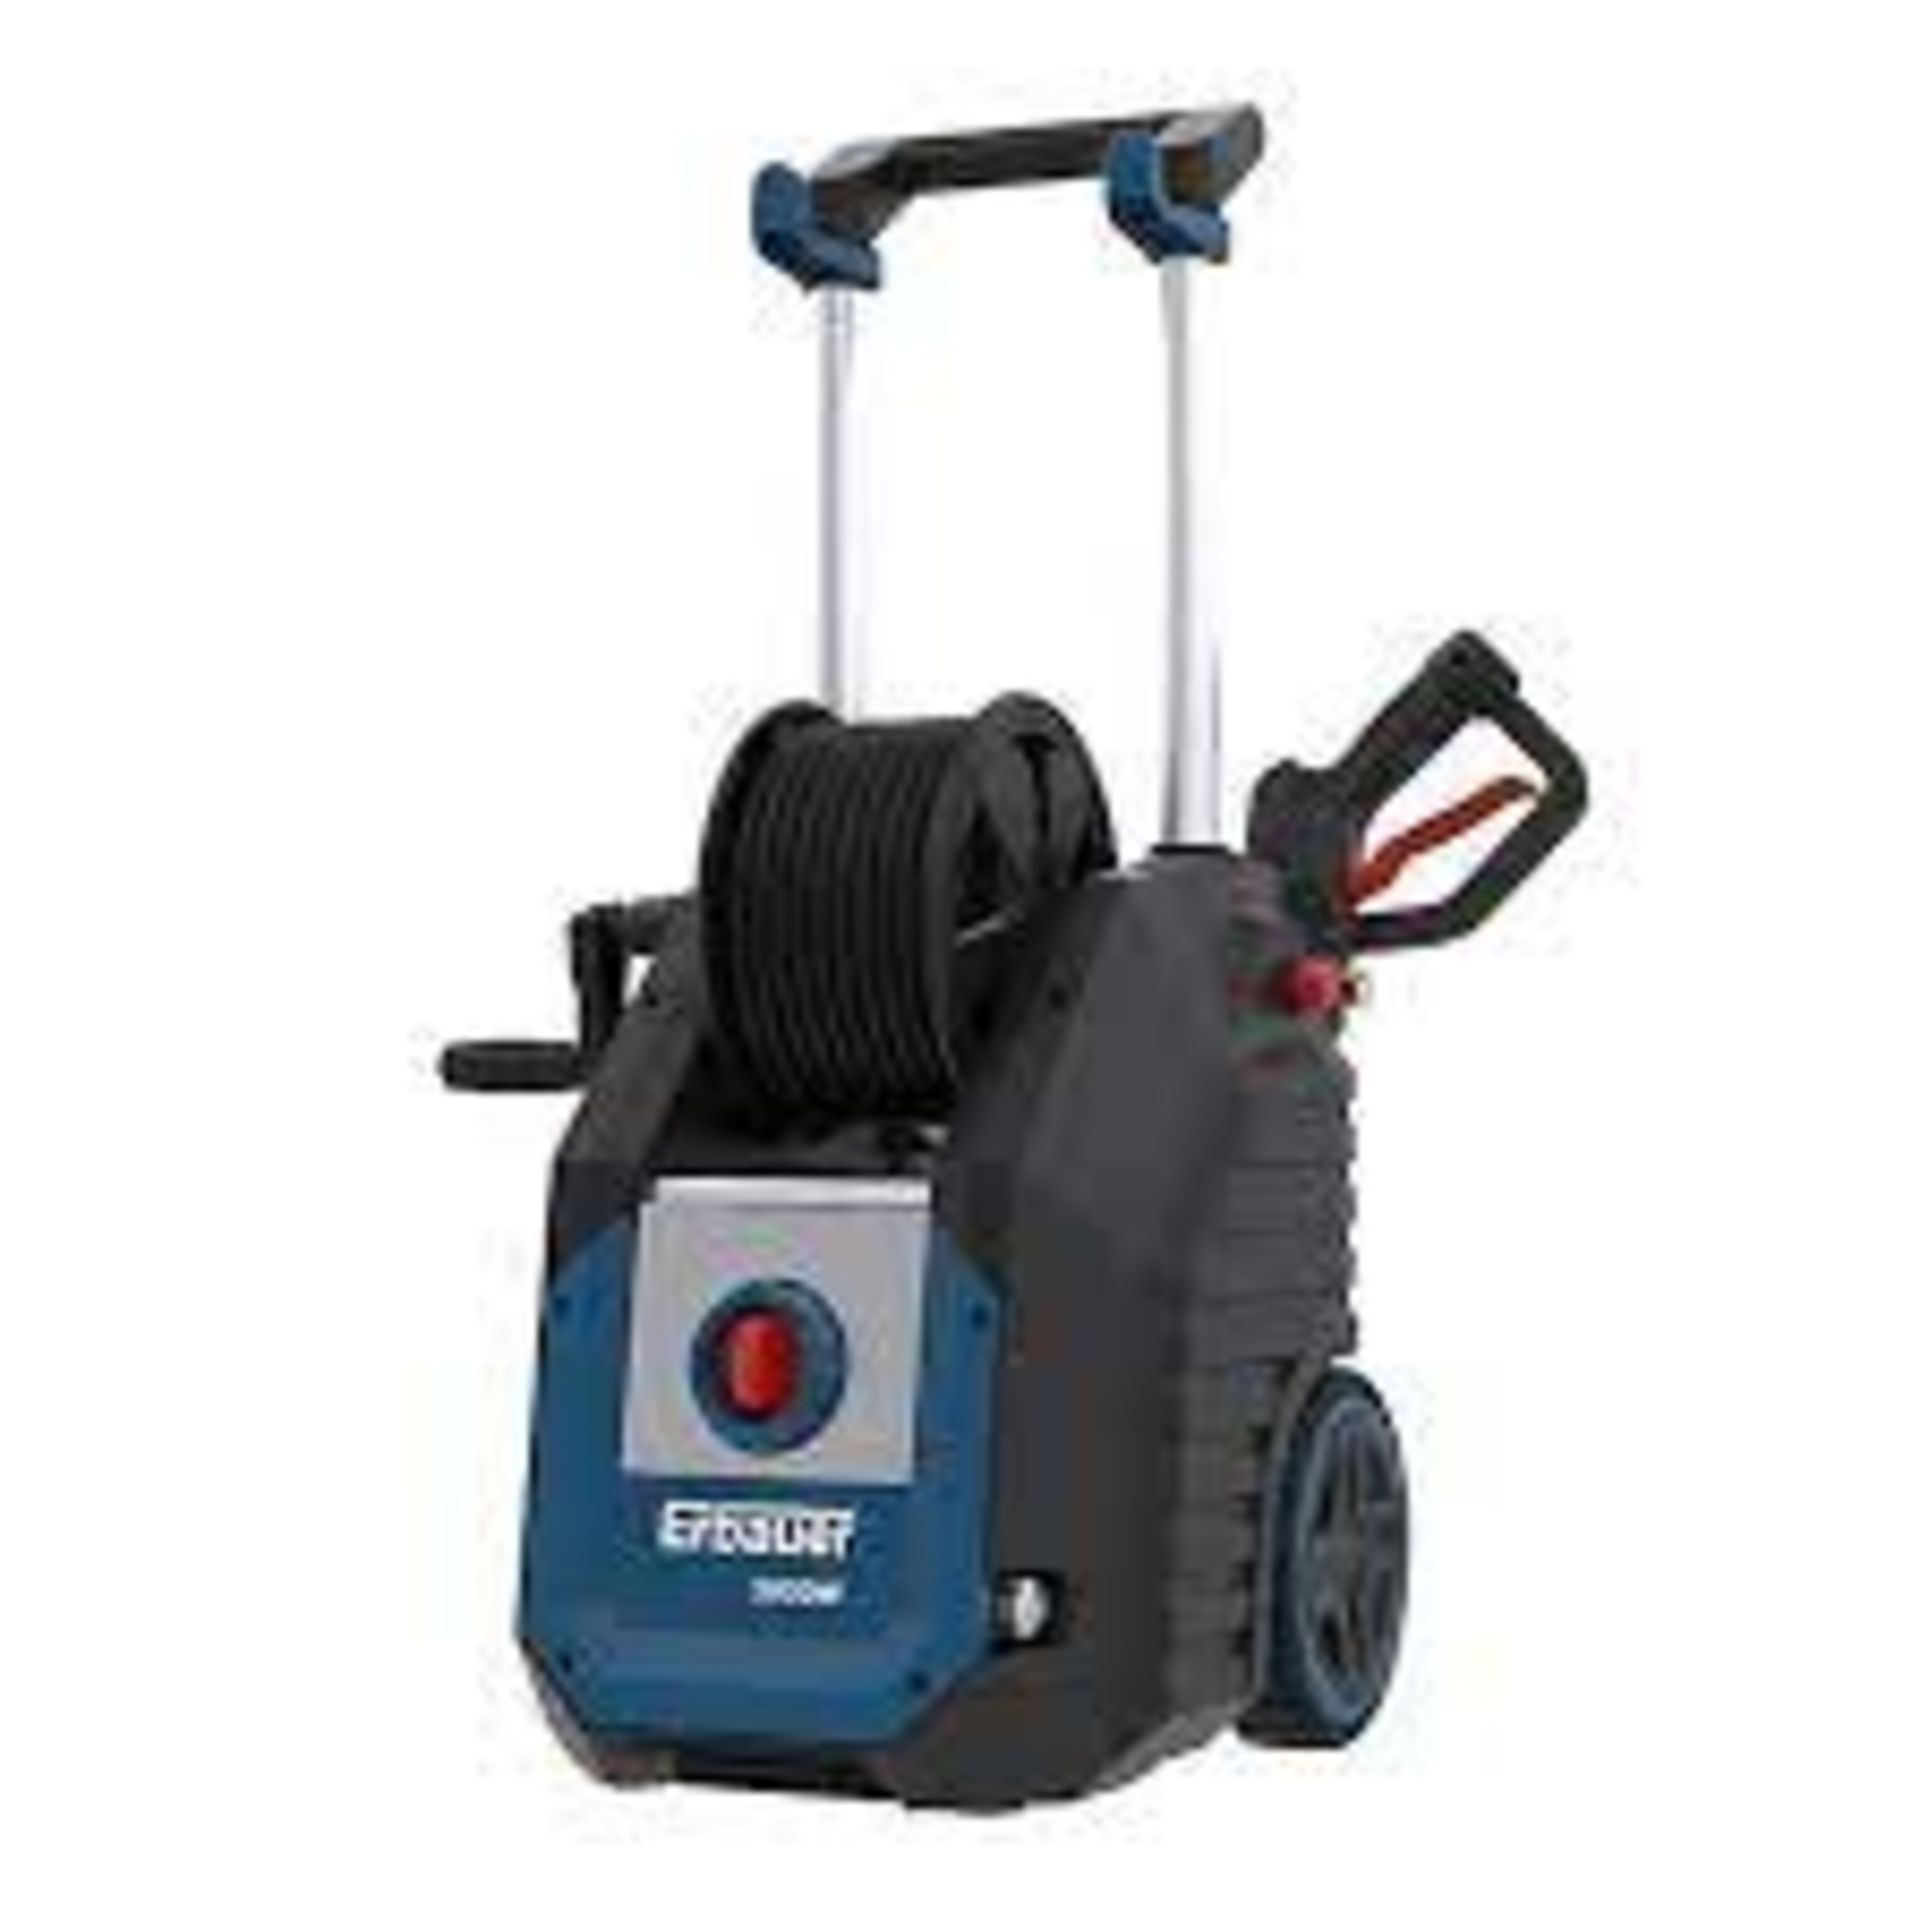 Erbauer Corded Pressure Washer 3KW EBPW3000. - ER47. Versatile pressure washer suitable for a wide